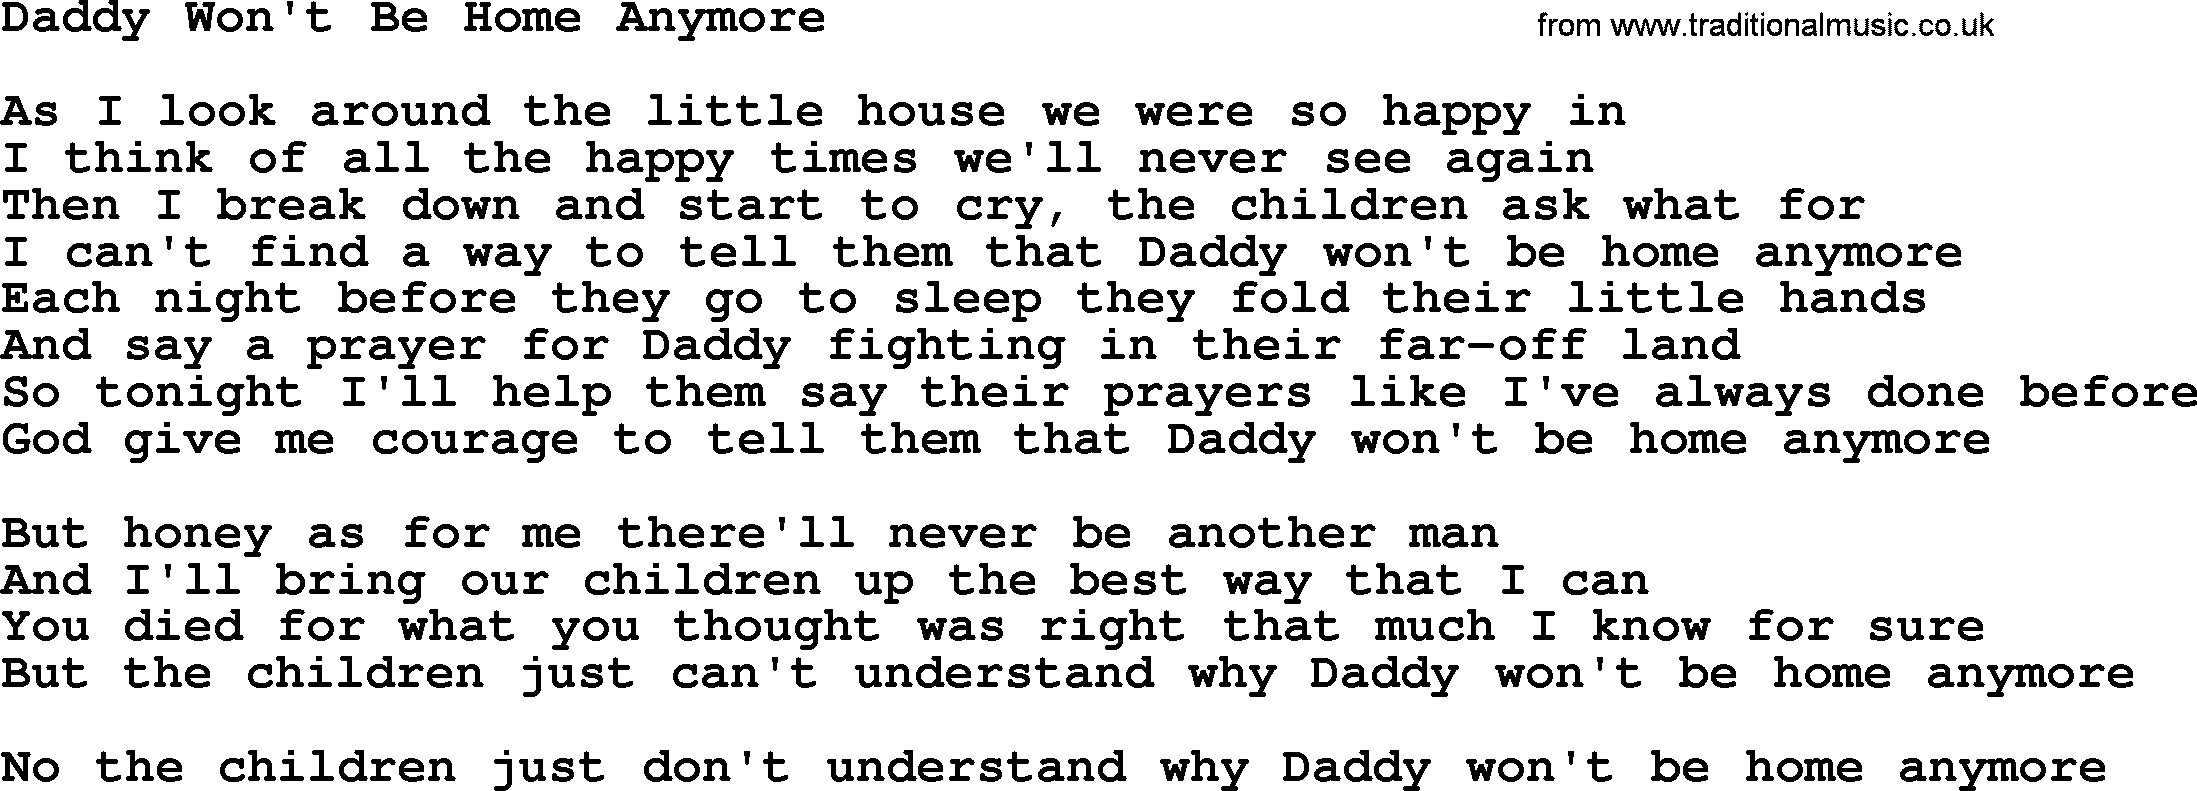 Dolly Parton song Daddy Won't Be Home Anymore.txt lyrics